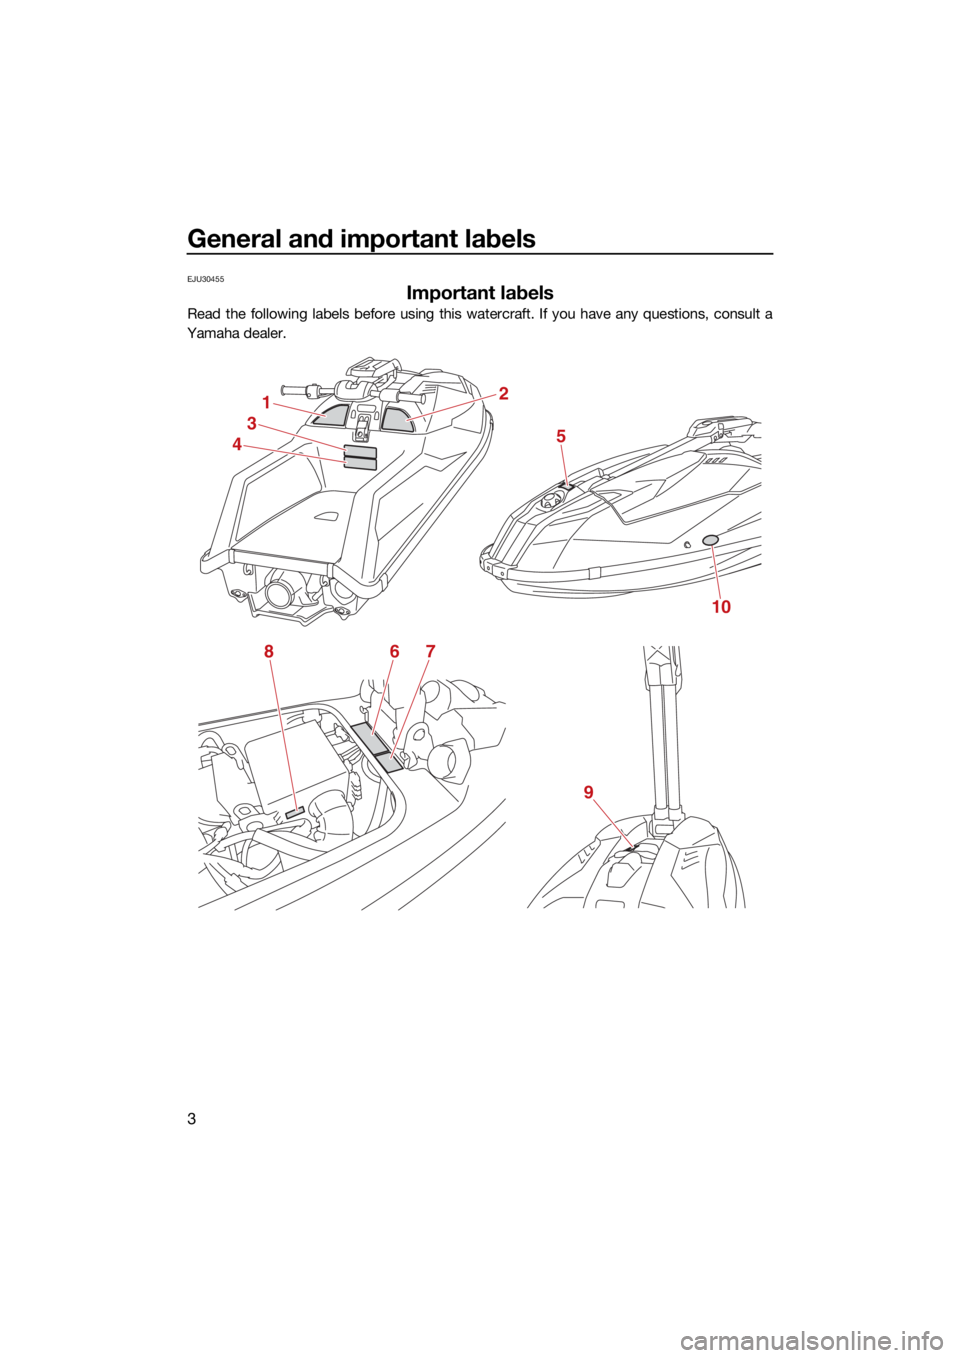 YAMAHA SUPERJET 2022  Owners Manual General and important labels
3
EJU30455
Important labels
Read the following labels before using this watercraft. If you have any questions, consult a
Yamaha dealer.
1
3
4
2
5
10
678
9
UF4R71E0.book  P